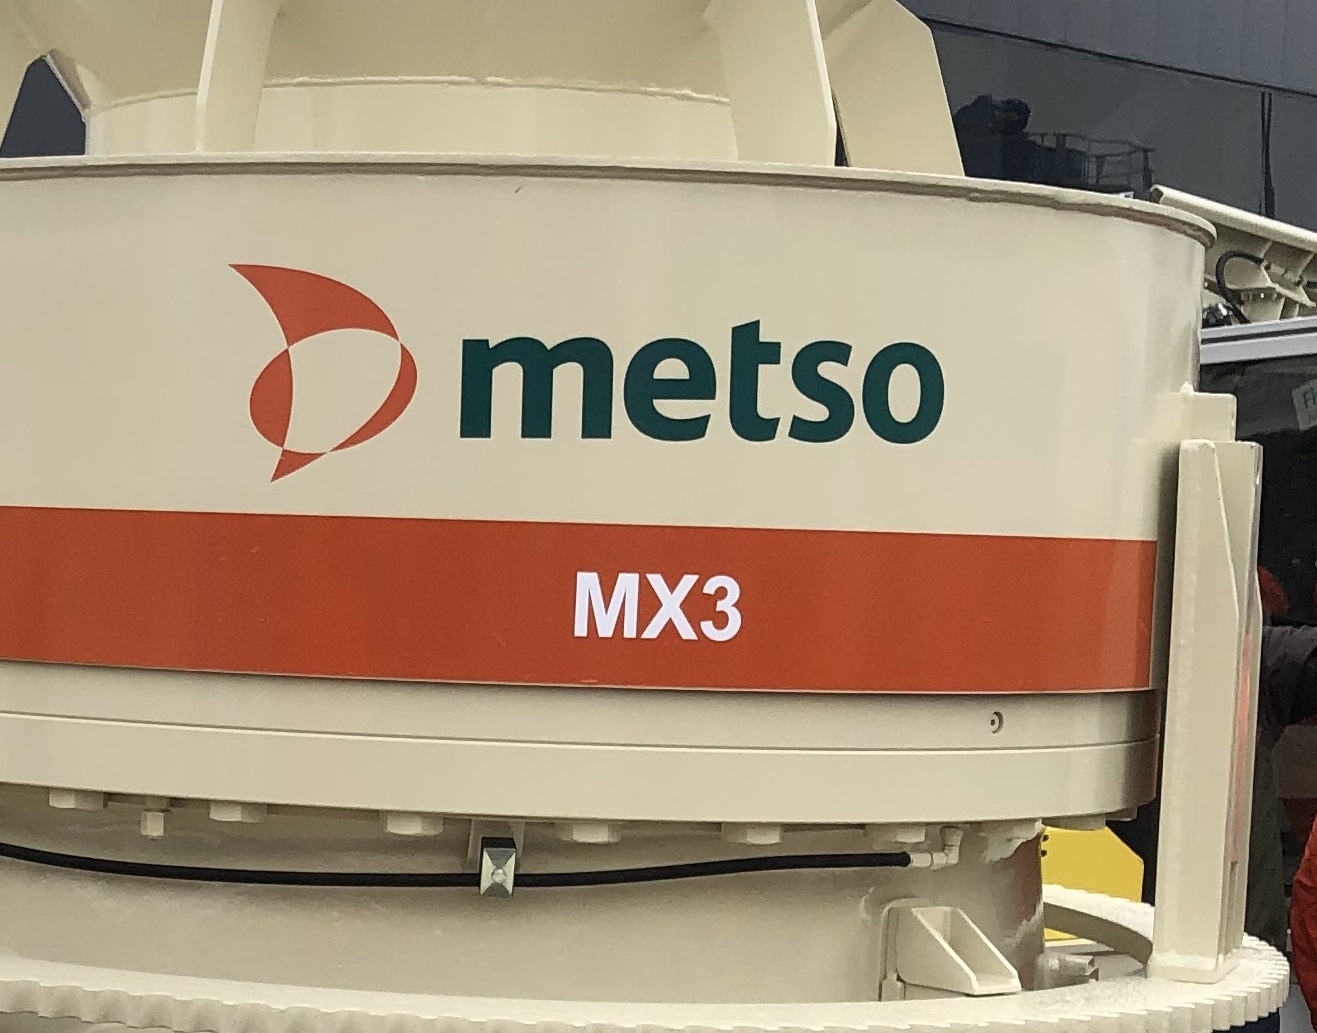 Metso is evaluating warehouse operations in nine European countries